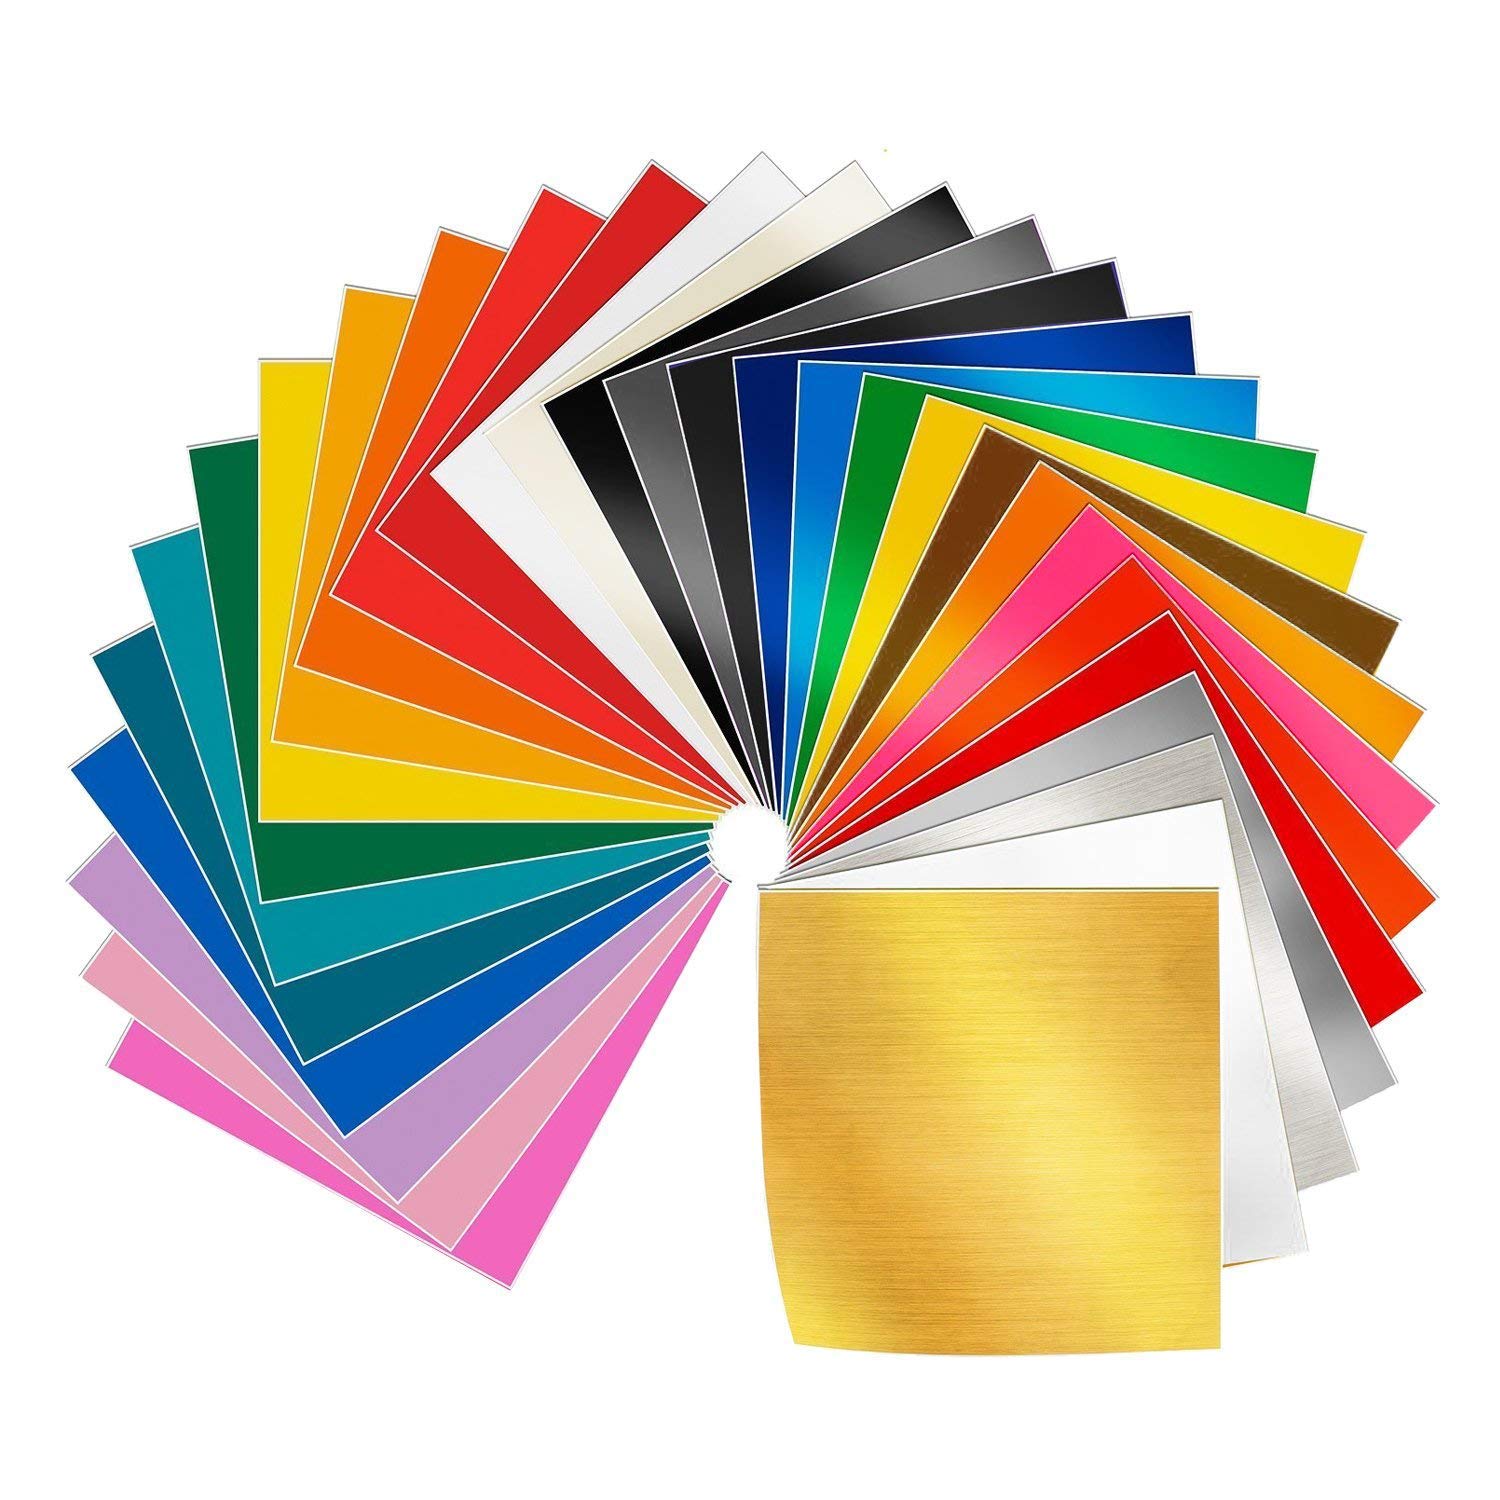 Know everything about adhesive vinyl and its types